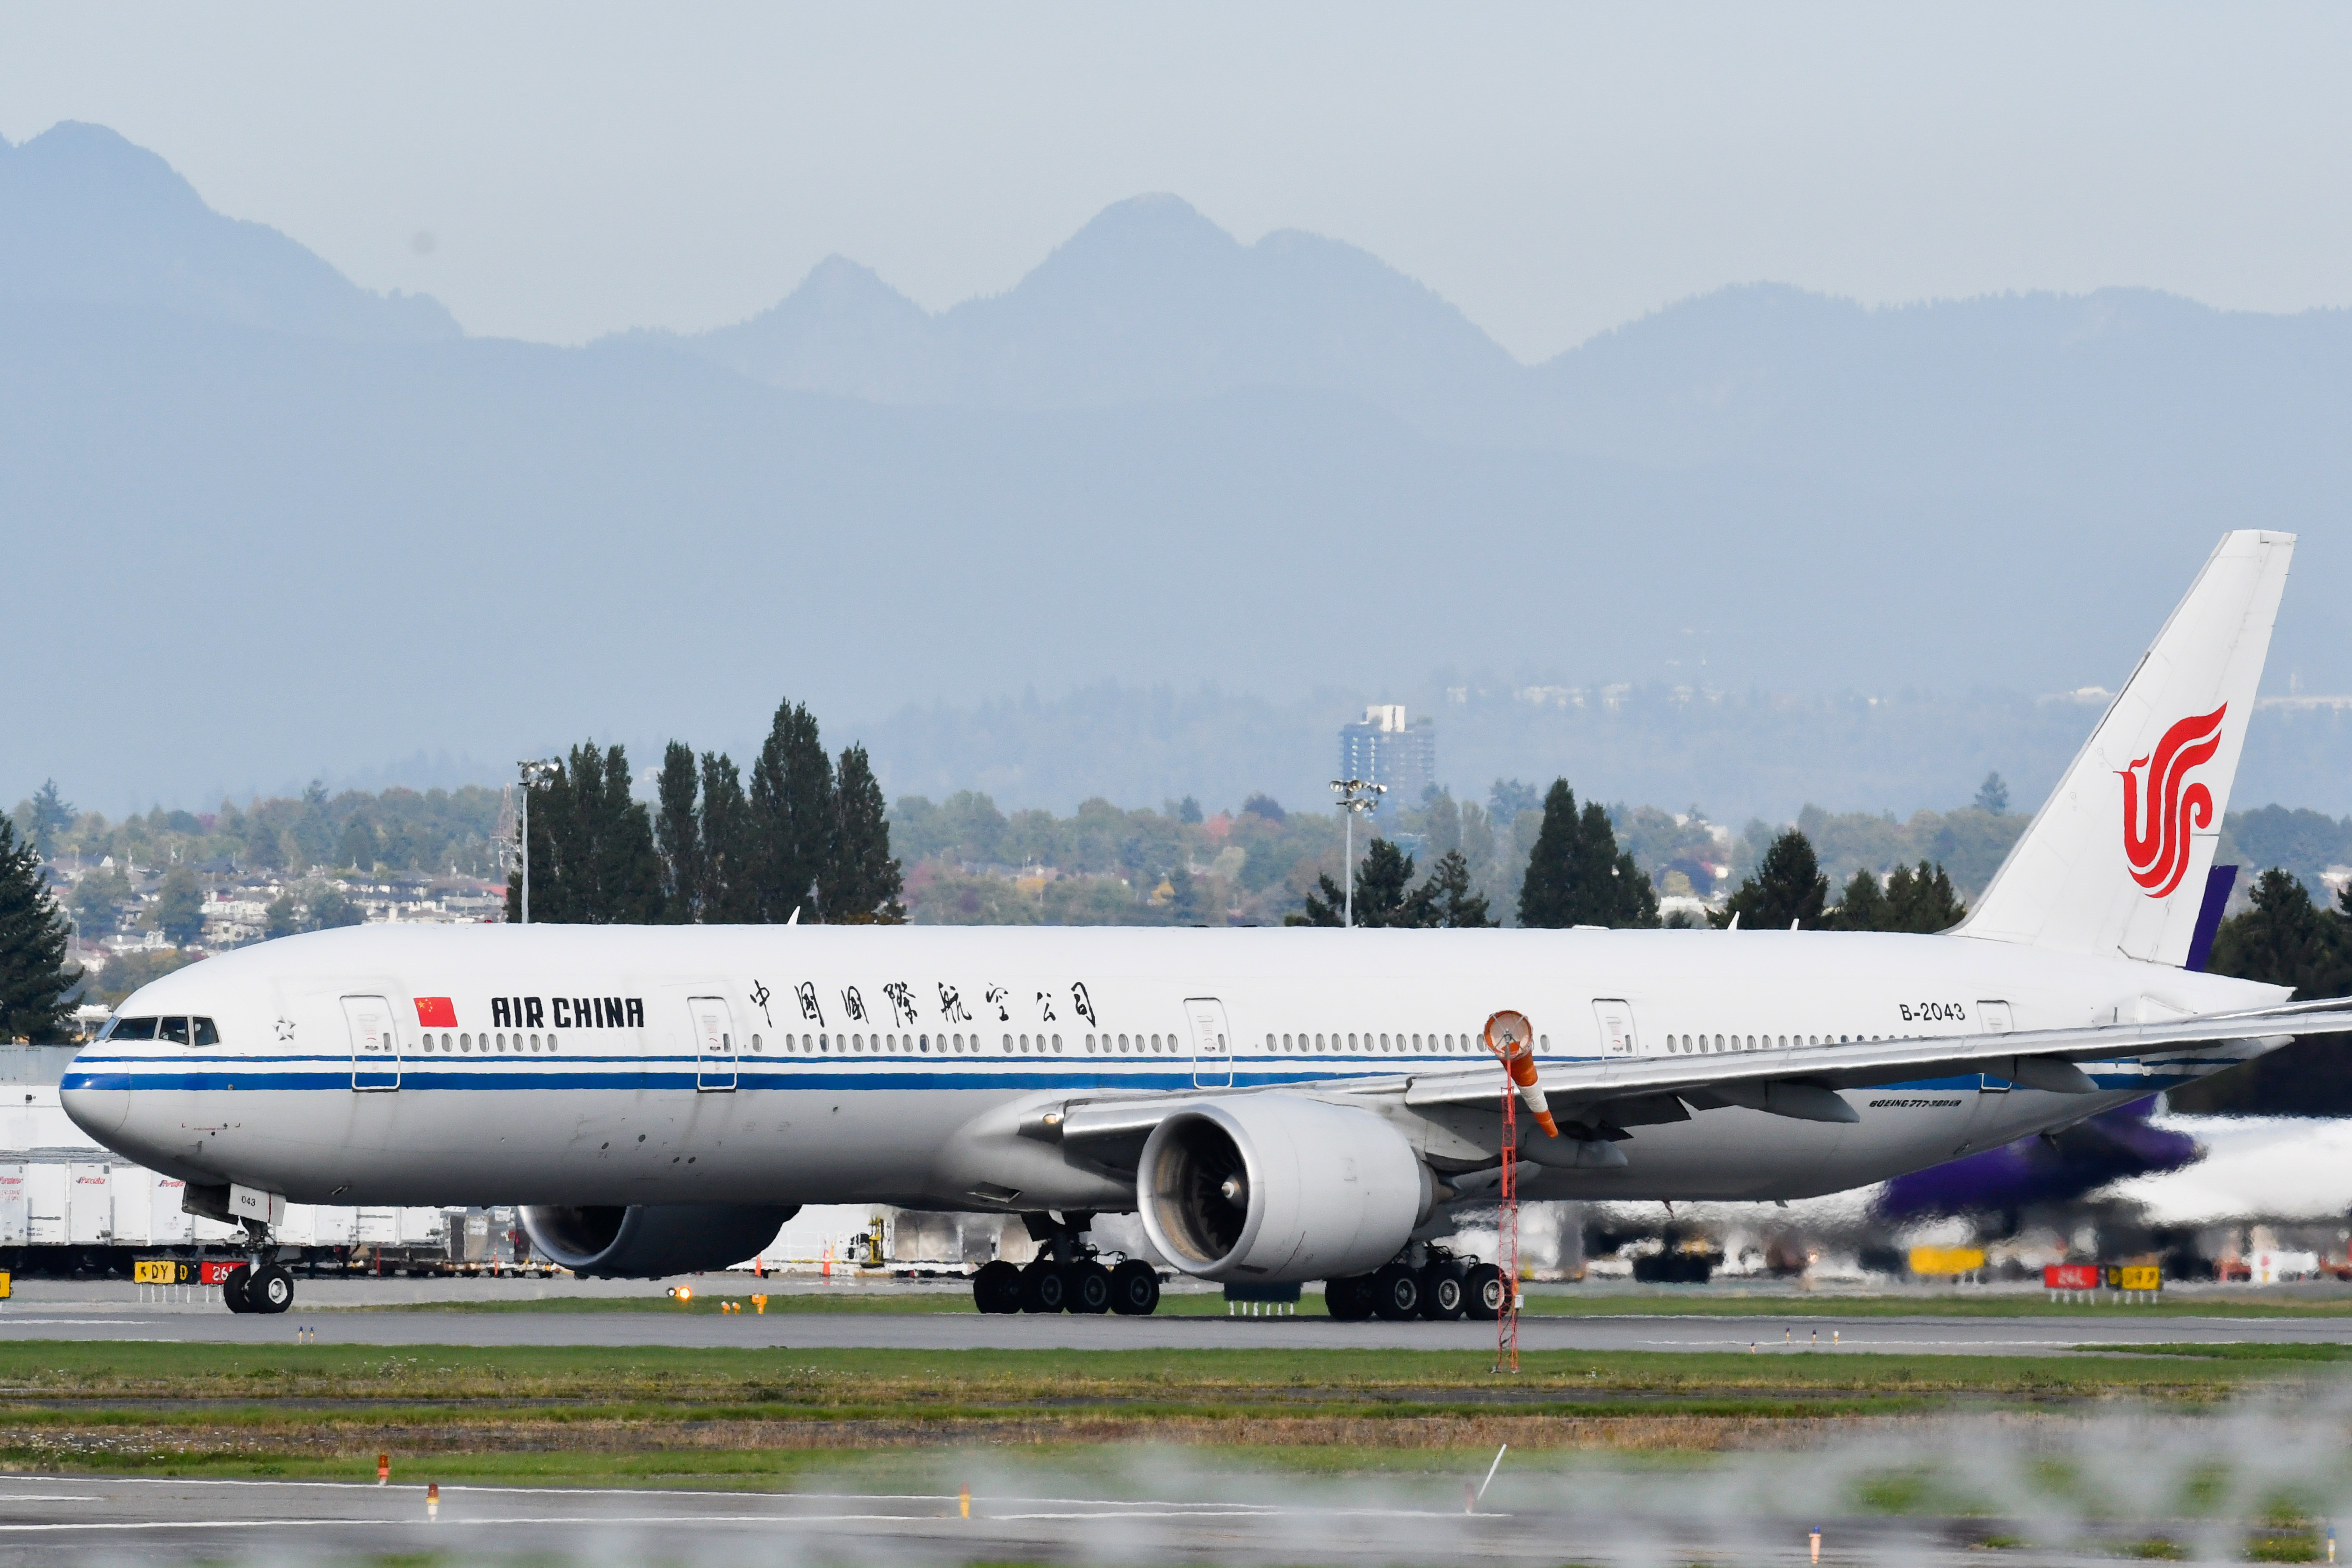 An Air China flight bound for Shenzhen, believed to be carrying Huawei CFO Meng Wanzhou, takes off from Vancouver International Aiport in Richmond, British Columbia, Canada September 24, 2021. REUTERS/Jennifer Gauthier